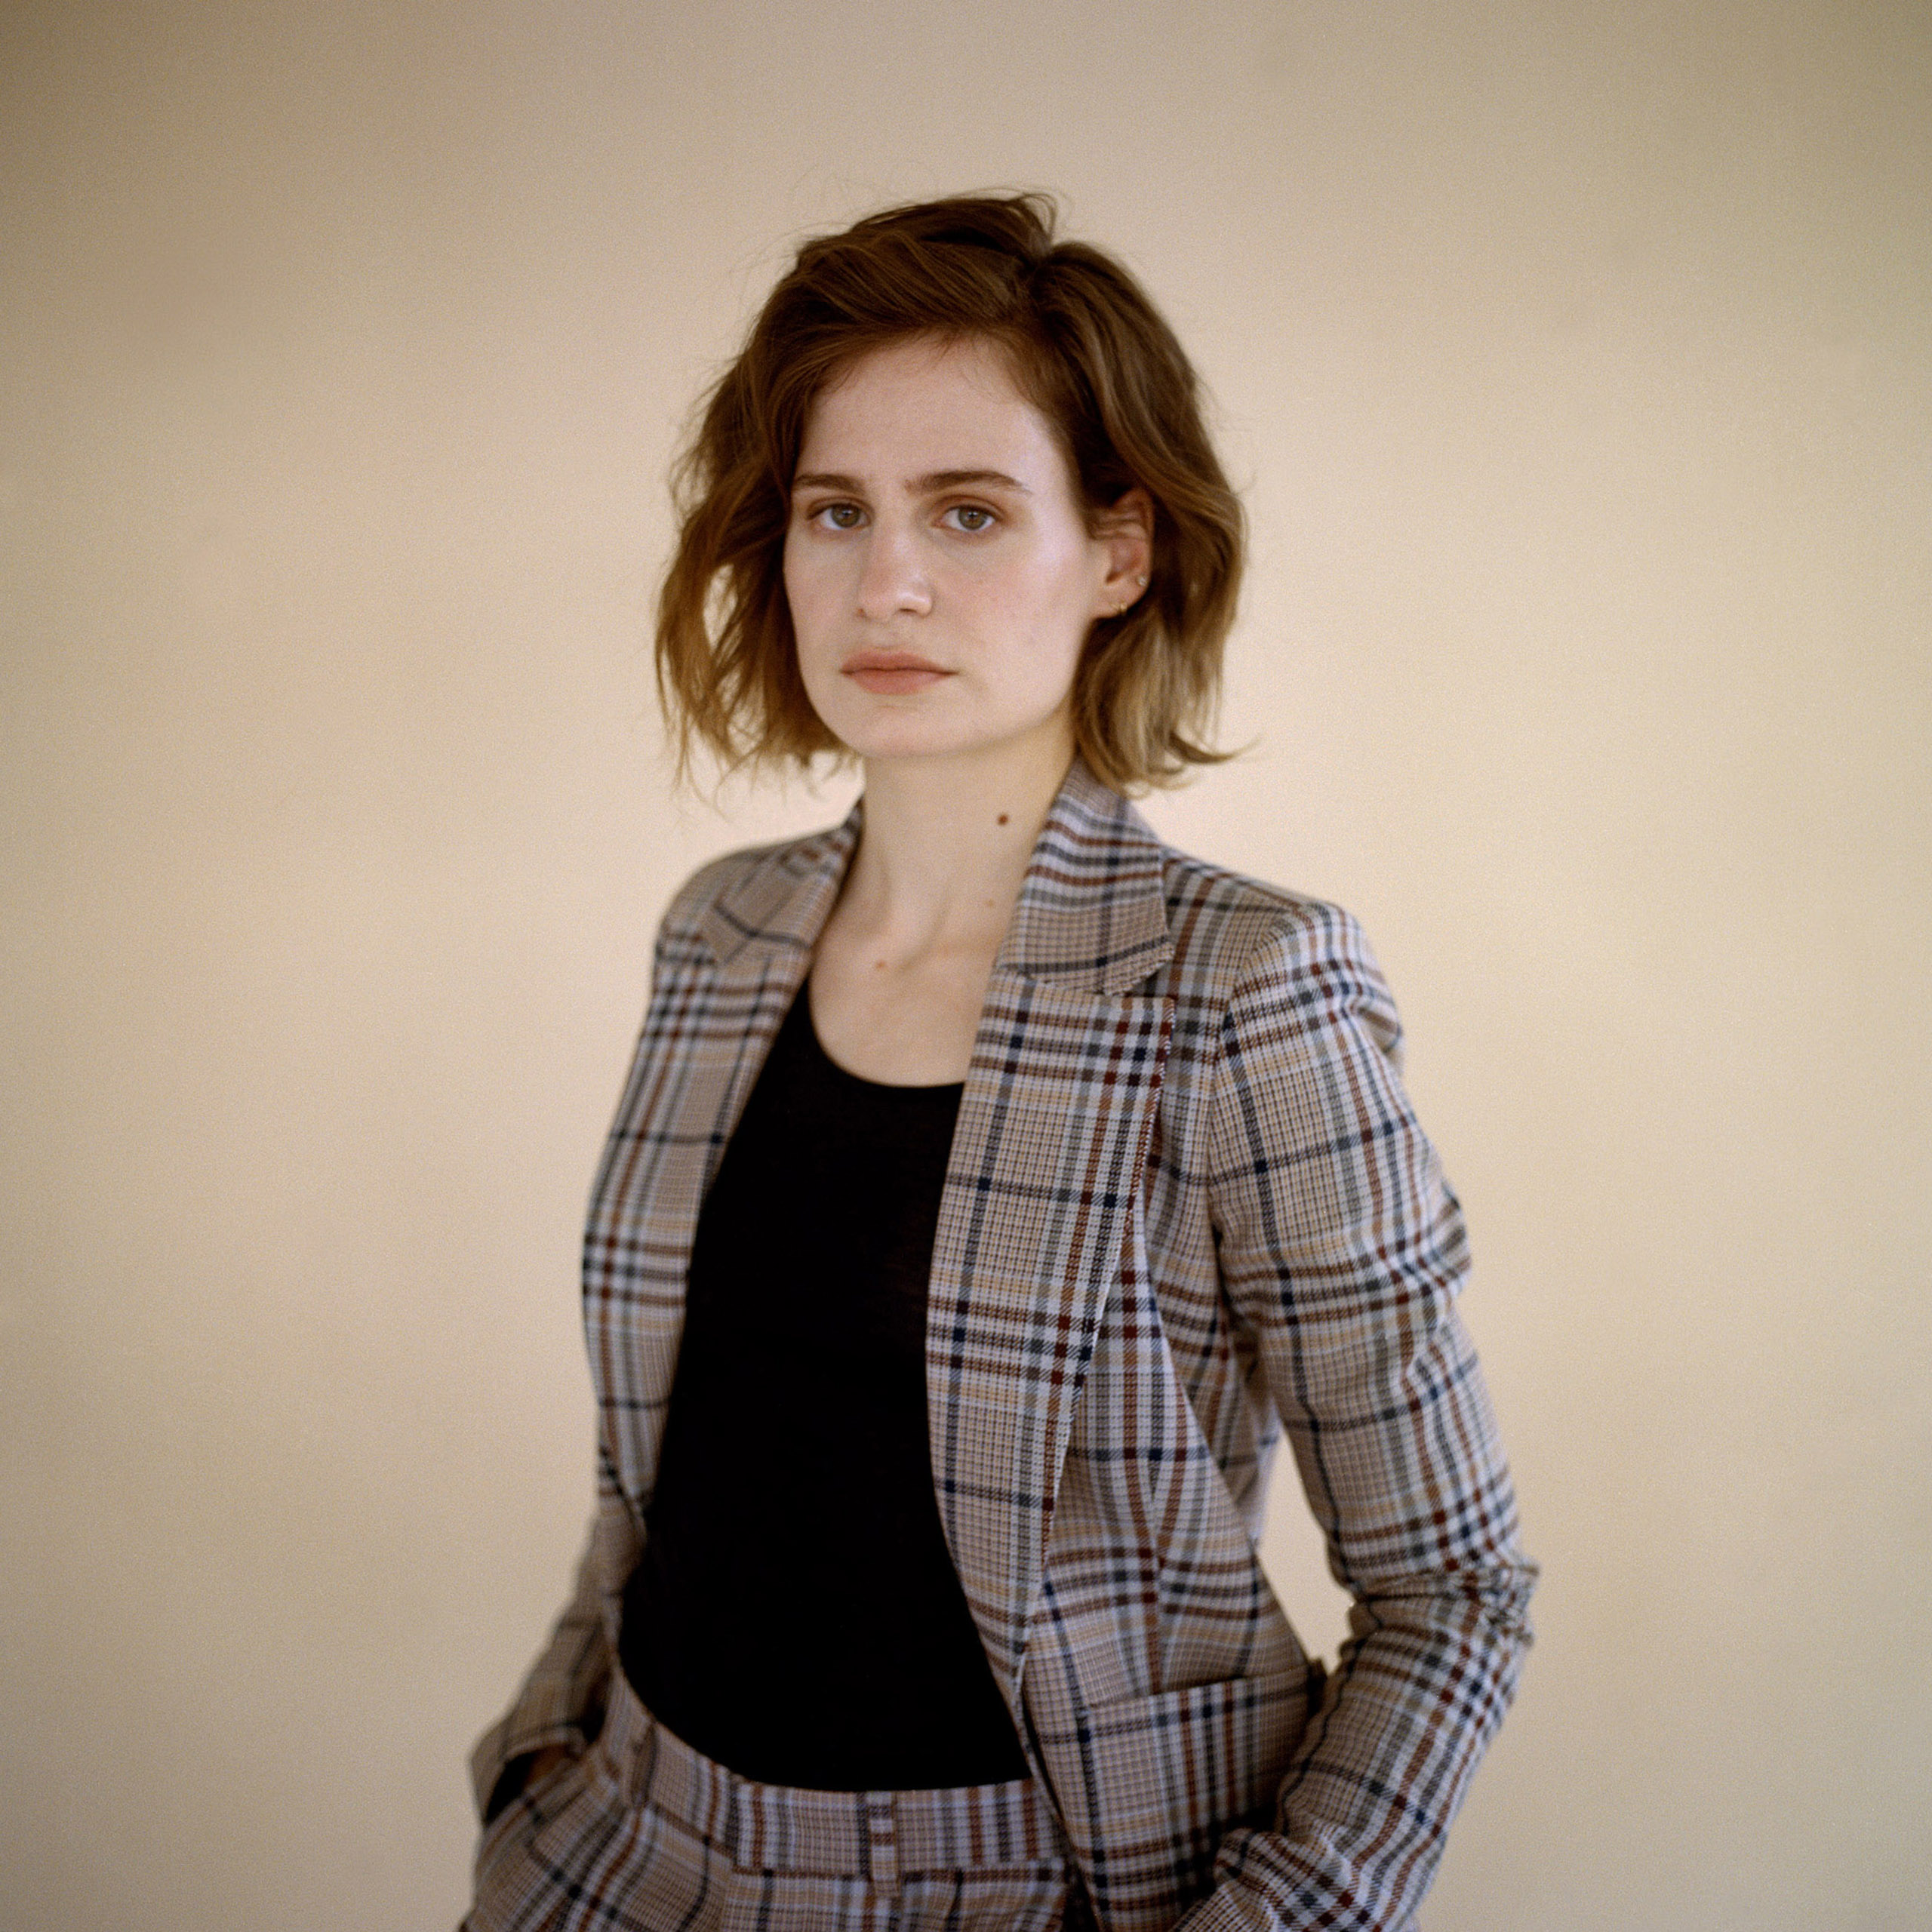 French singer Hélo?se Letissier, a solo artist who performs as Christine and the Queens photographed in London, UK. Sept. 12, 2016. (Laura Pannack for TIME)